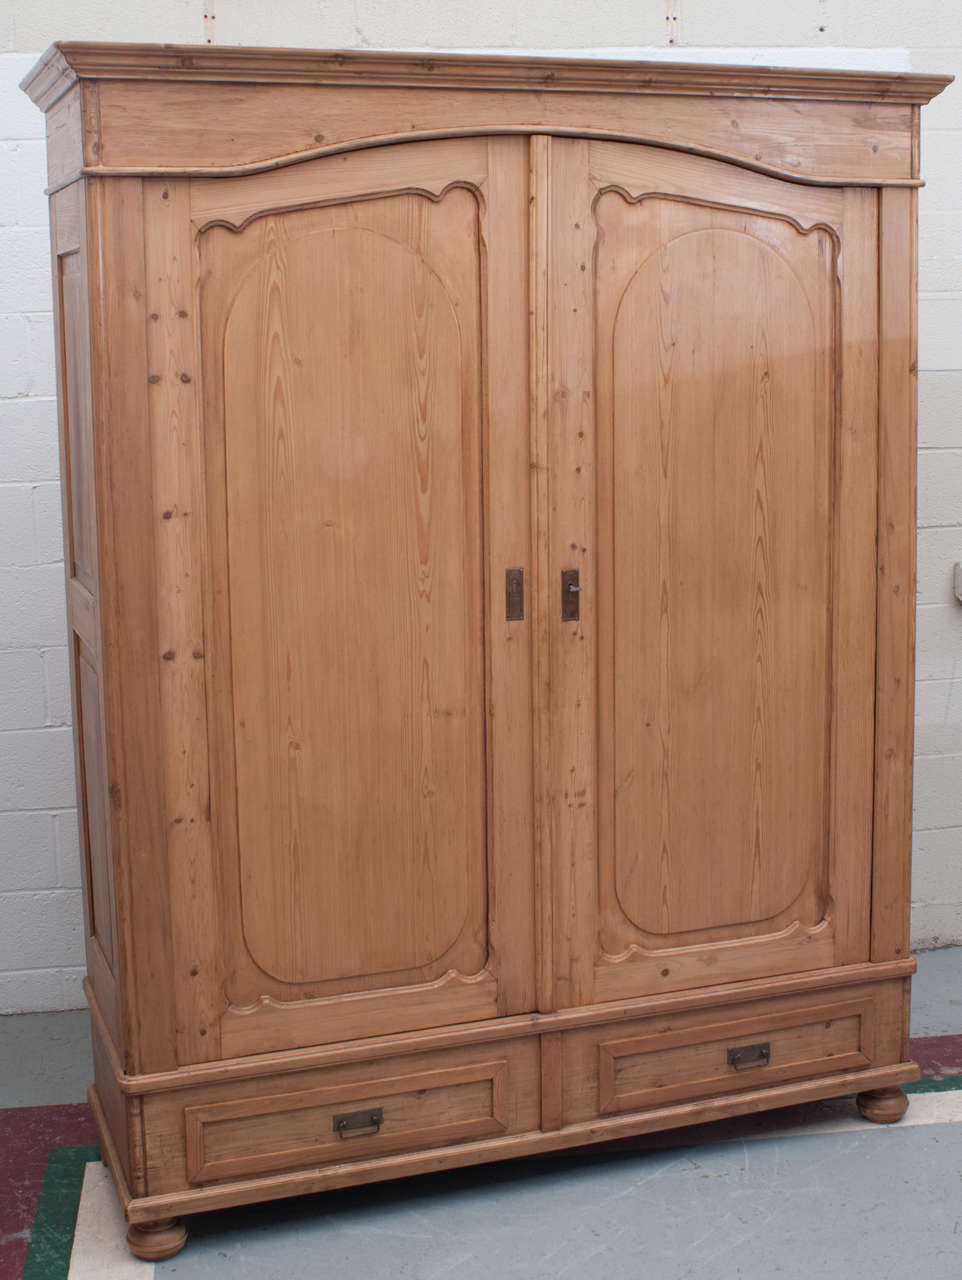 A large and handsome pine armoire featuring raised panelled sides, two scallop panelled arched doors with two faux drawer fronts to the base. Original wooden hanging pegs inside. Replaced crown molding. This piece completely breaks down for ease in